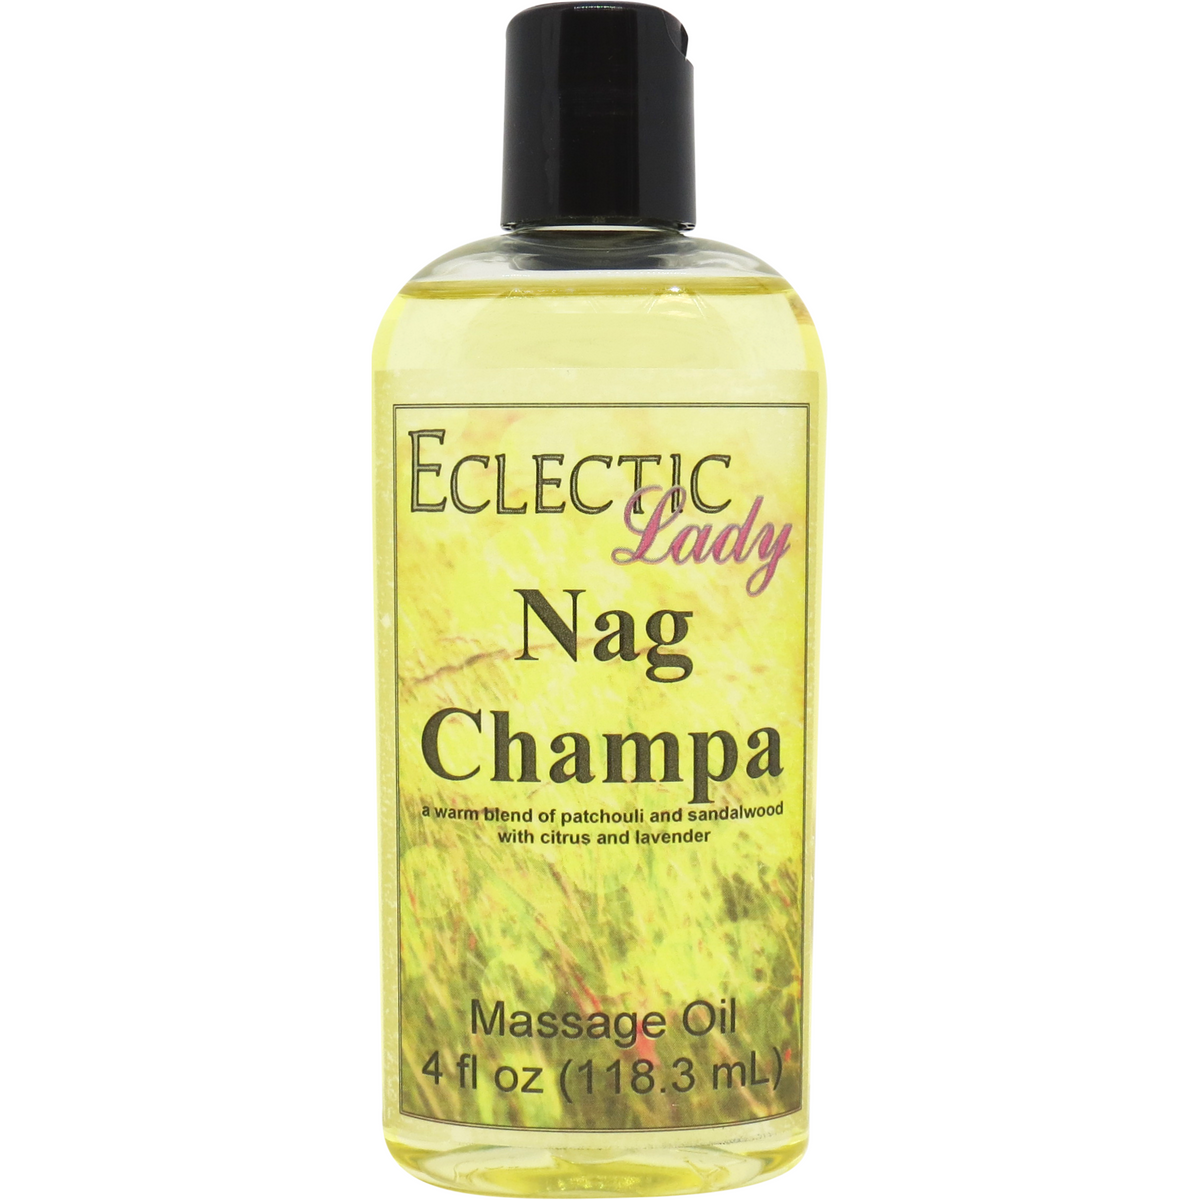 Eclectic Lady Nag Champa Massage Oil